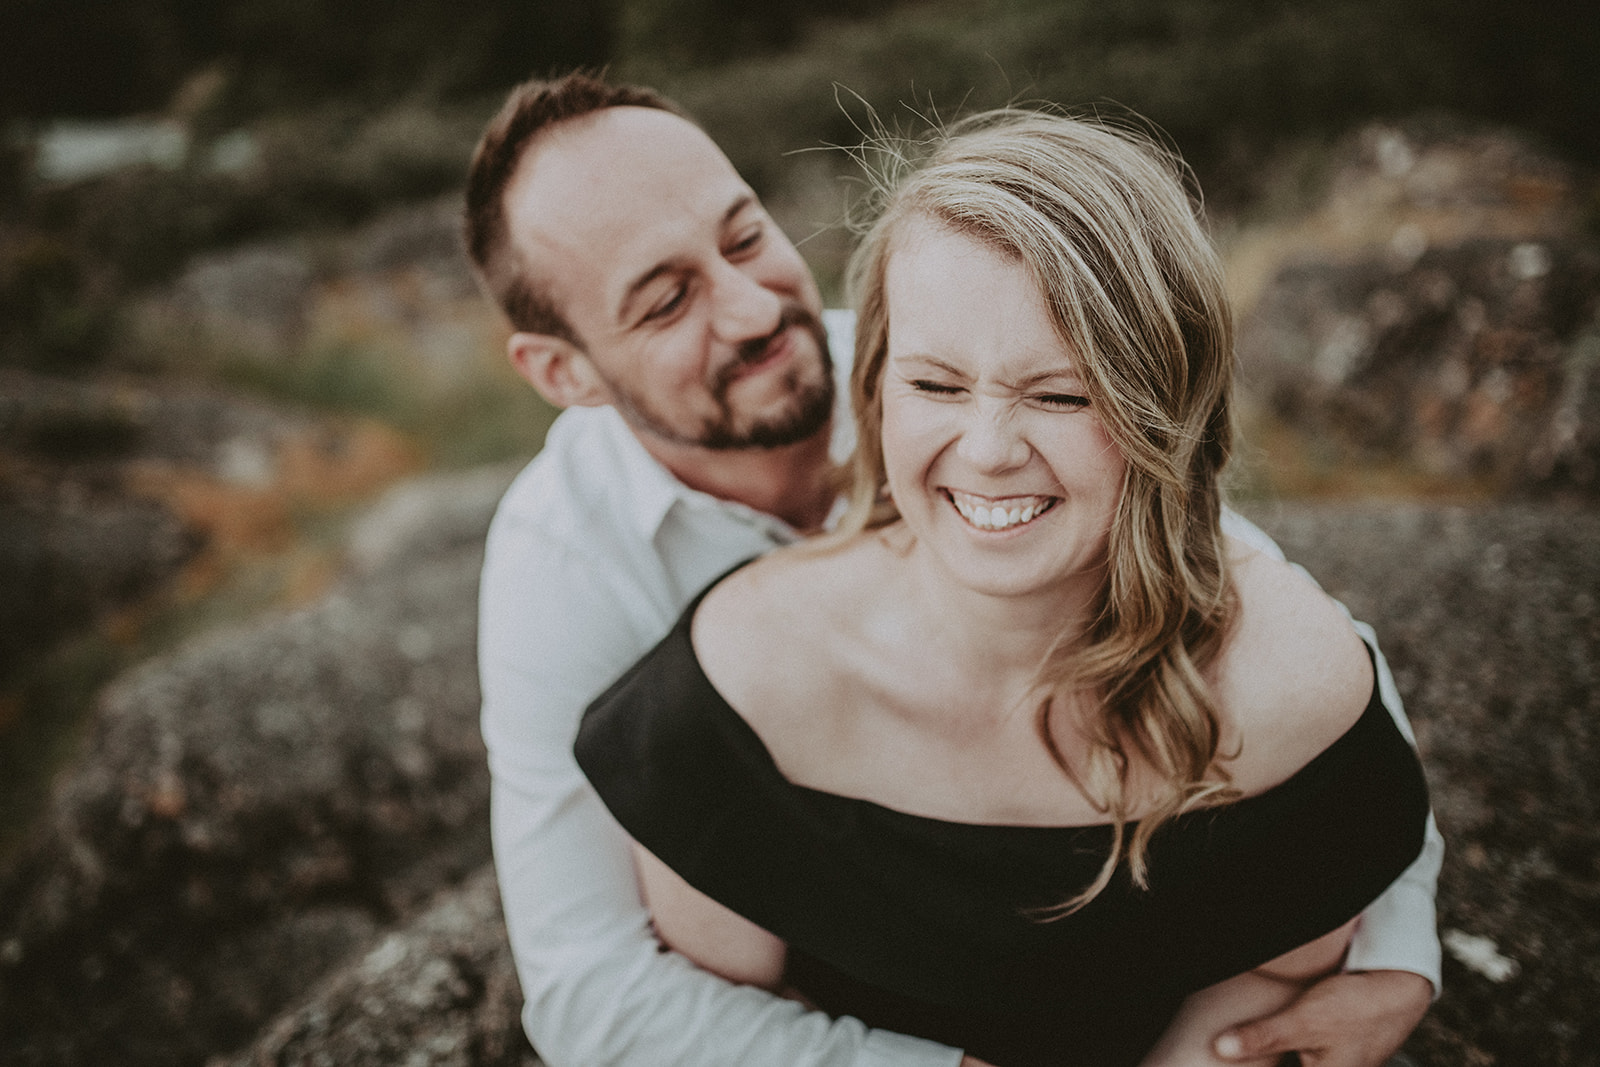 Victoria BC engagement photography. Couple in love in an rural setting